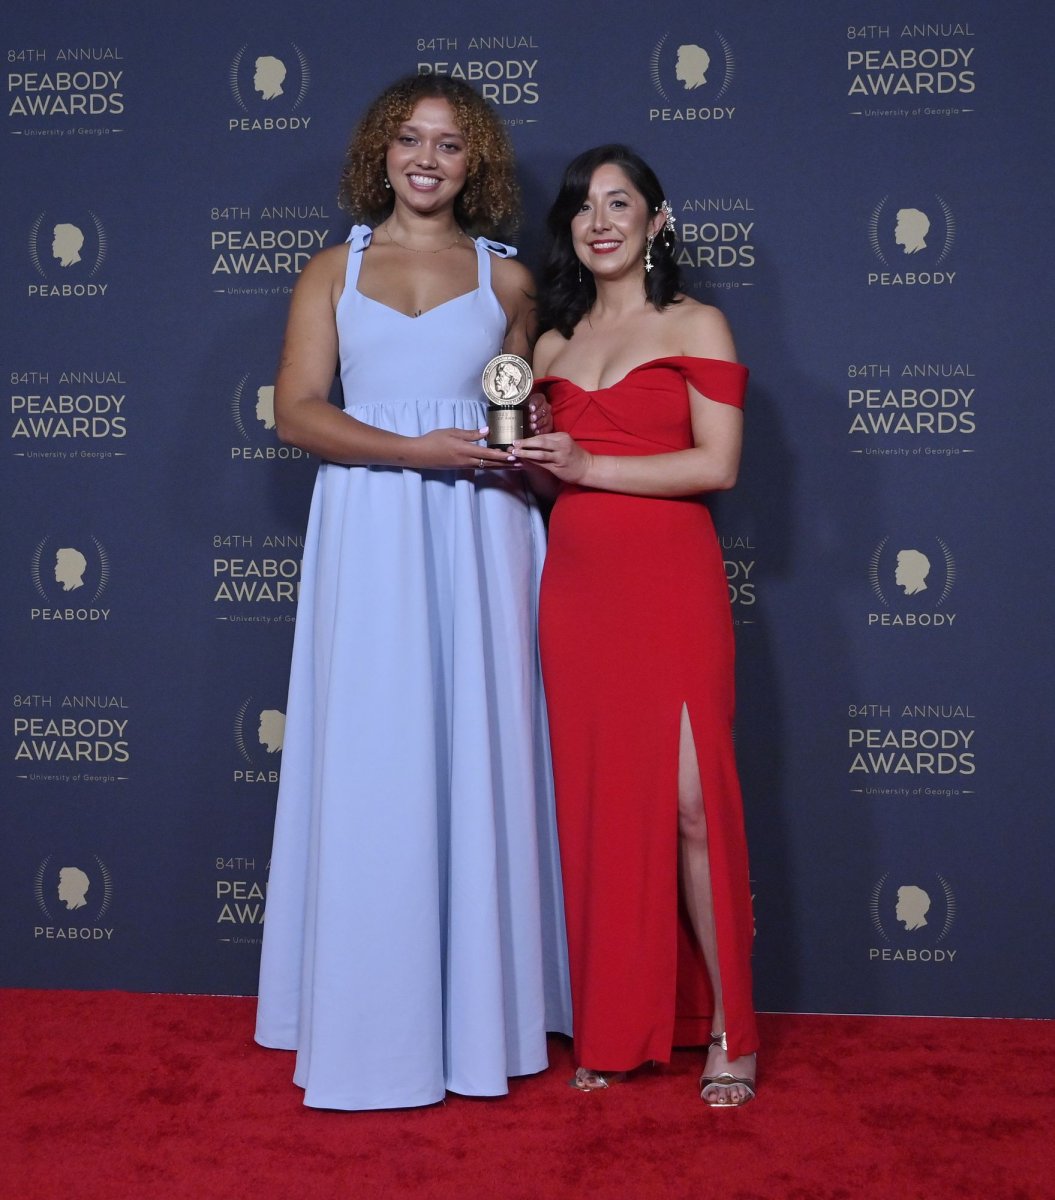 <p>Moriah Balingit, (L) and Sabby Robinson pose with their Radio/Podcast award for "Post Reports: Surviving to graduation." Photo by Jim Ruymen/UPI</p>